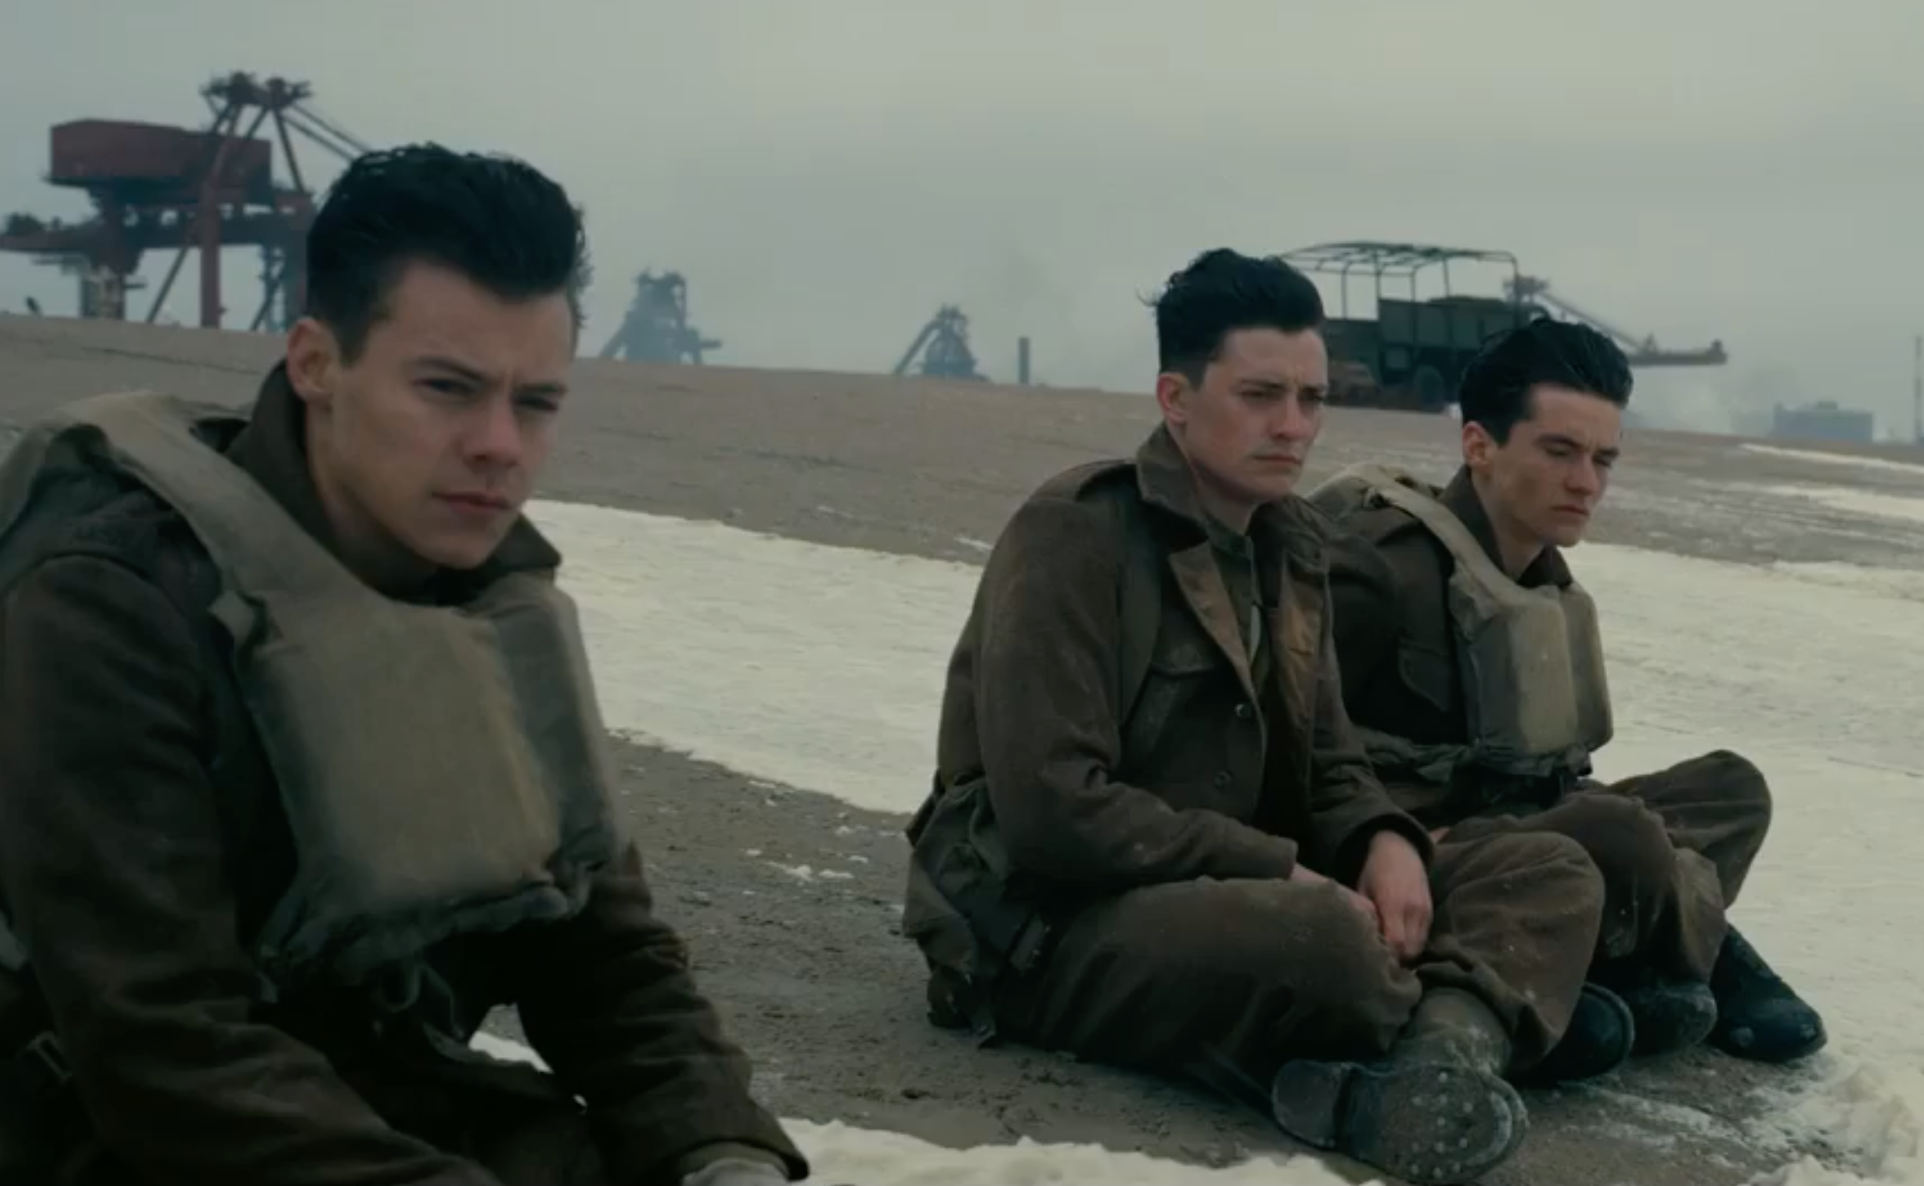 Christopher Nolan's <i></noscript>
<p><em>Dunkirk</em> is scheduled for wide release in the United States on July 21. Watch the full preview below.</p><div class=